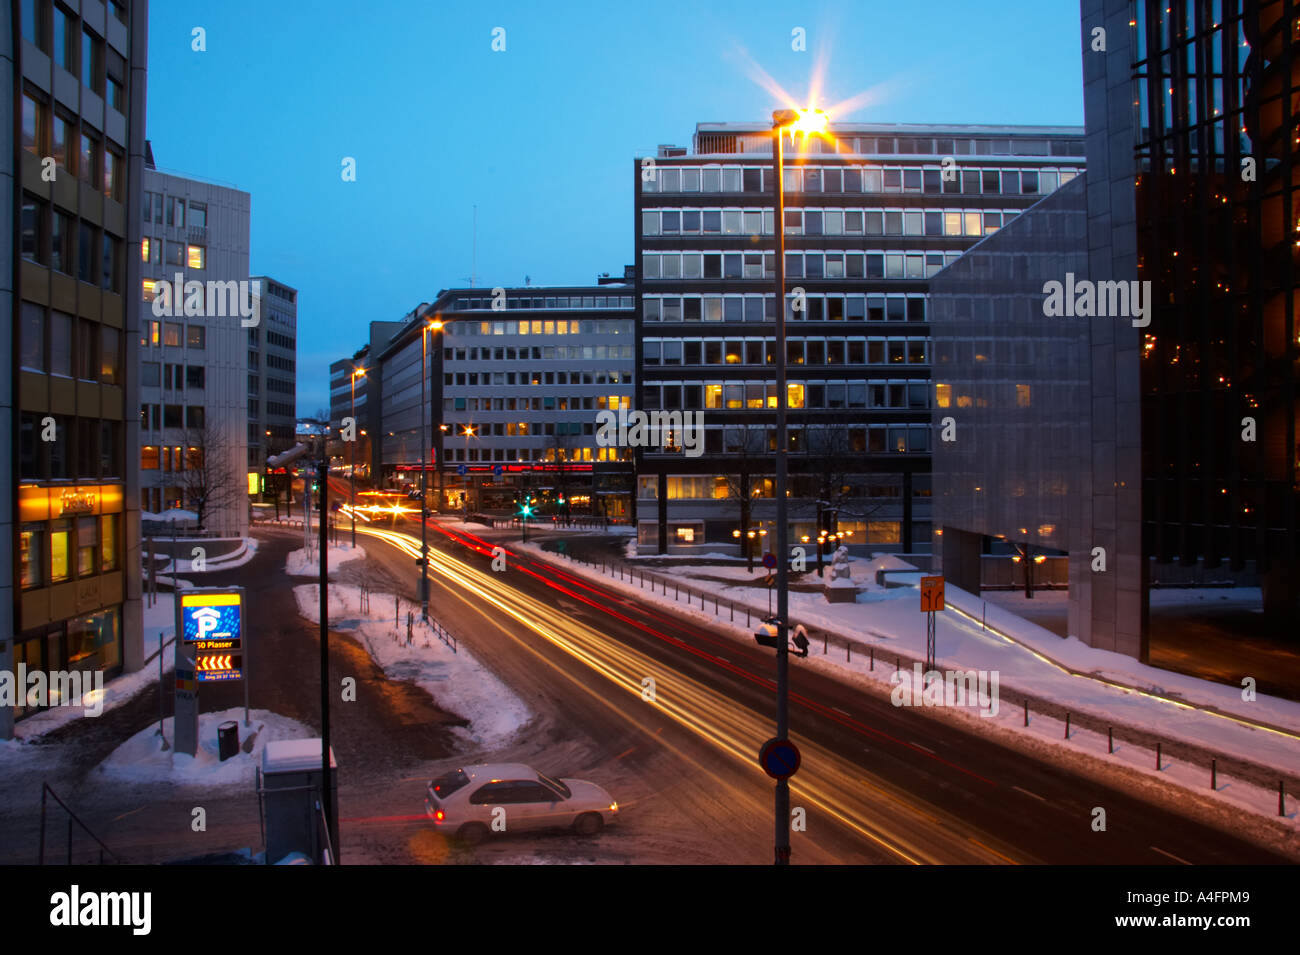 Norway, Oslo, Oslo City. Traffic trails running through a cityscape scene of Oslo City, in the Oslo region, captured at dusk. Stock Photo